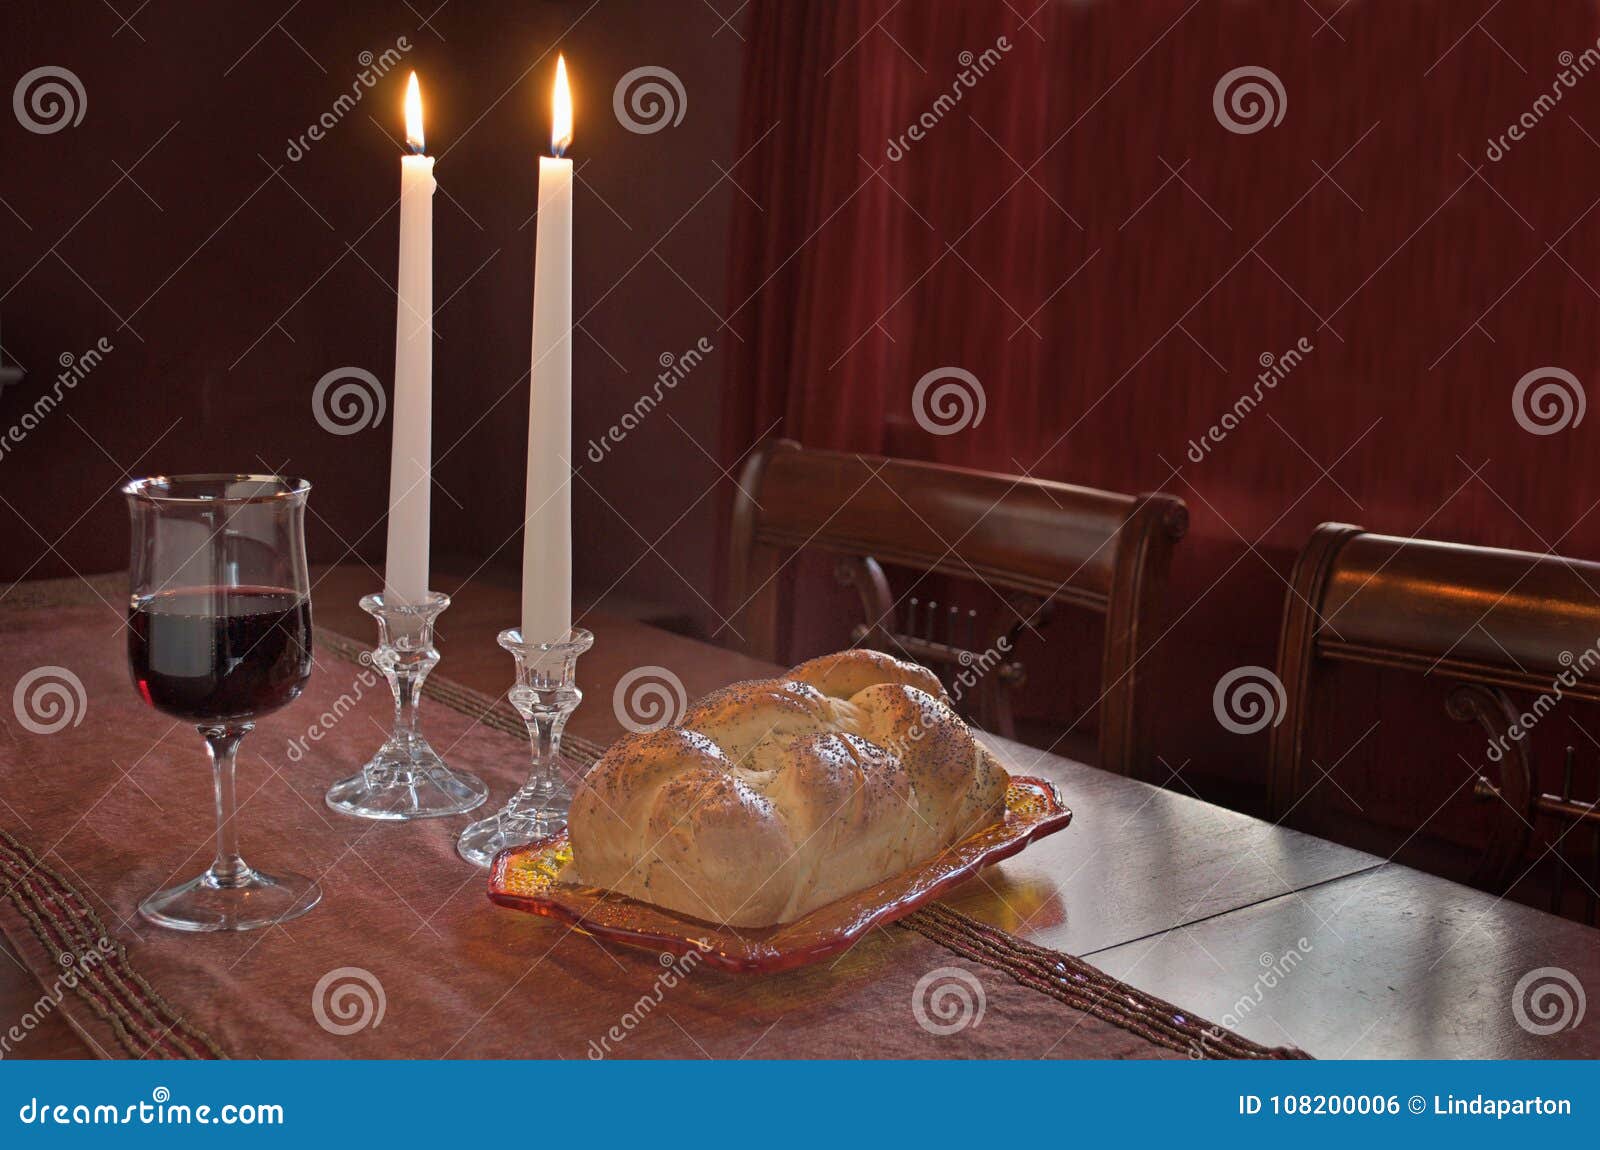 shabbat observance at sunset: challah, glass of wine, two lit candles